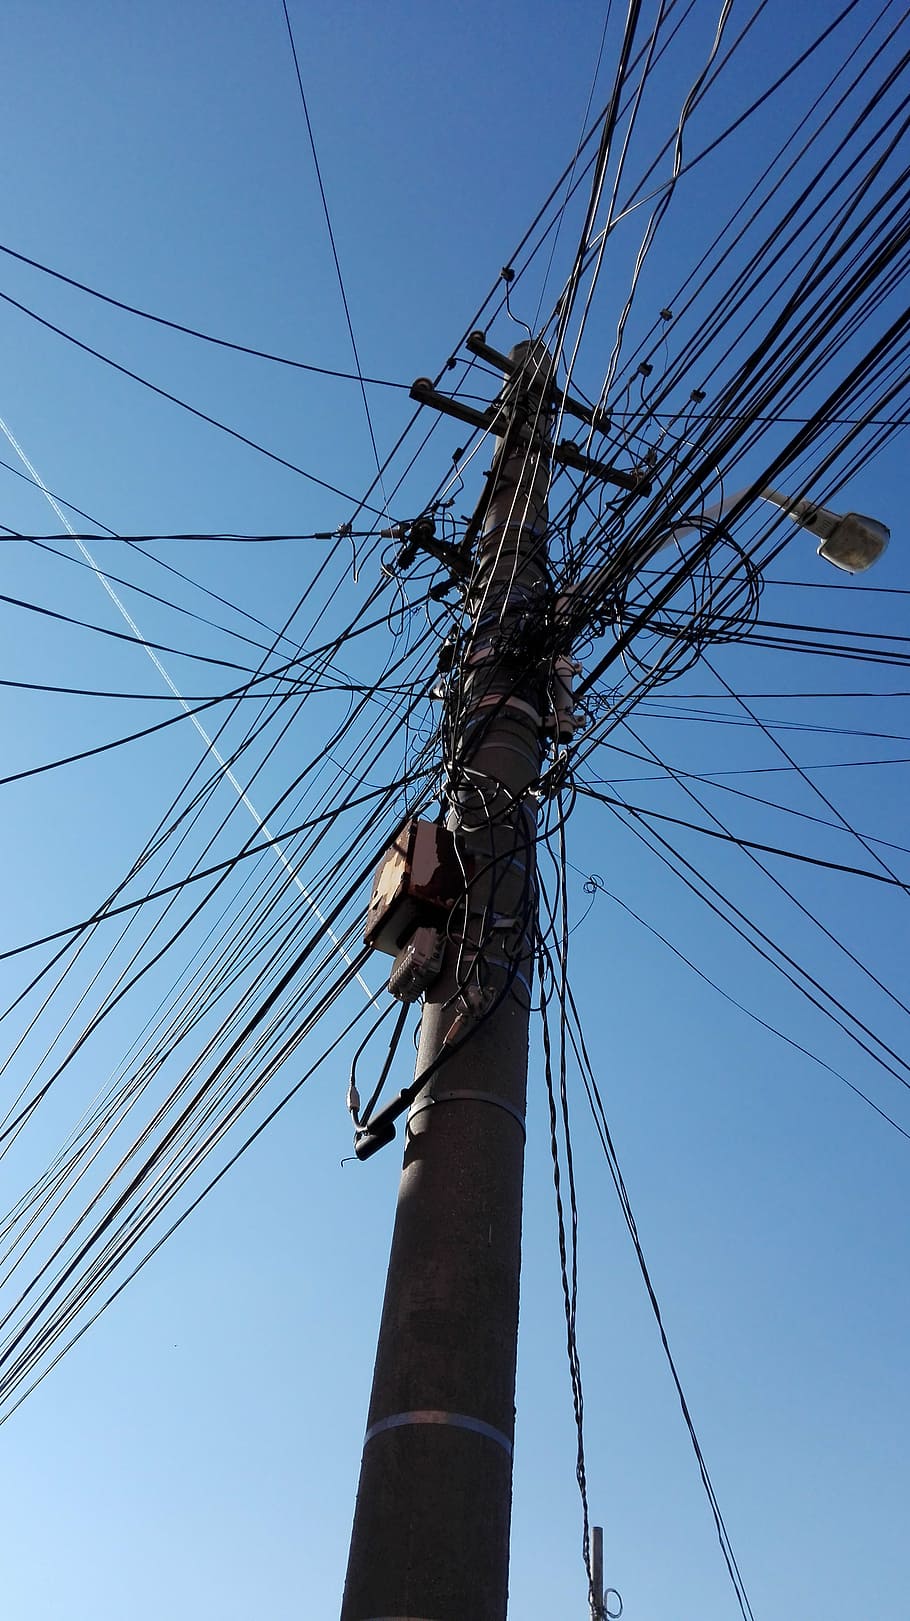 cables, pole, sky, cable, electricity, power line, low angle view, power supply, connection, electricity pylon